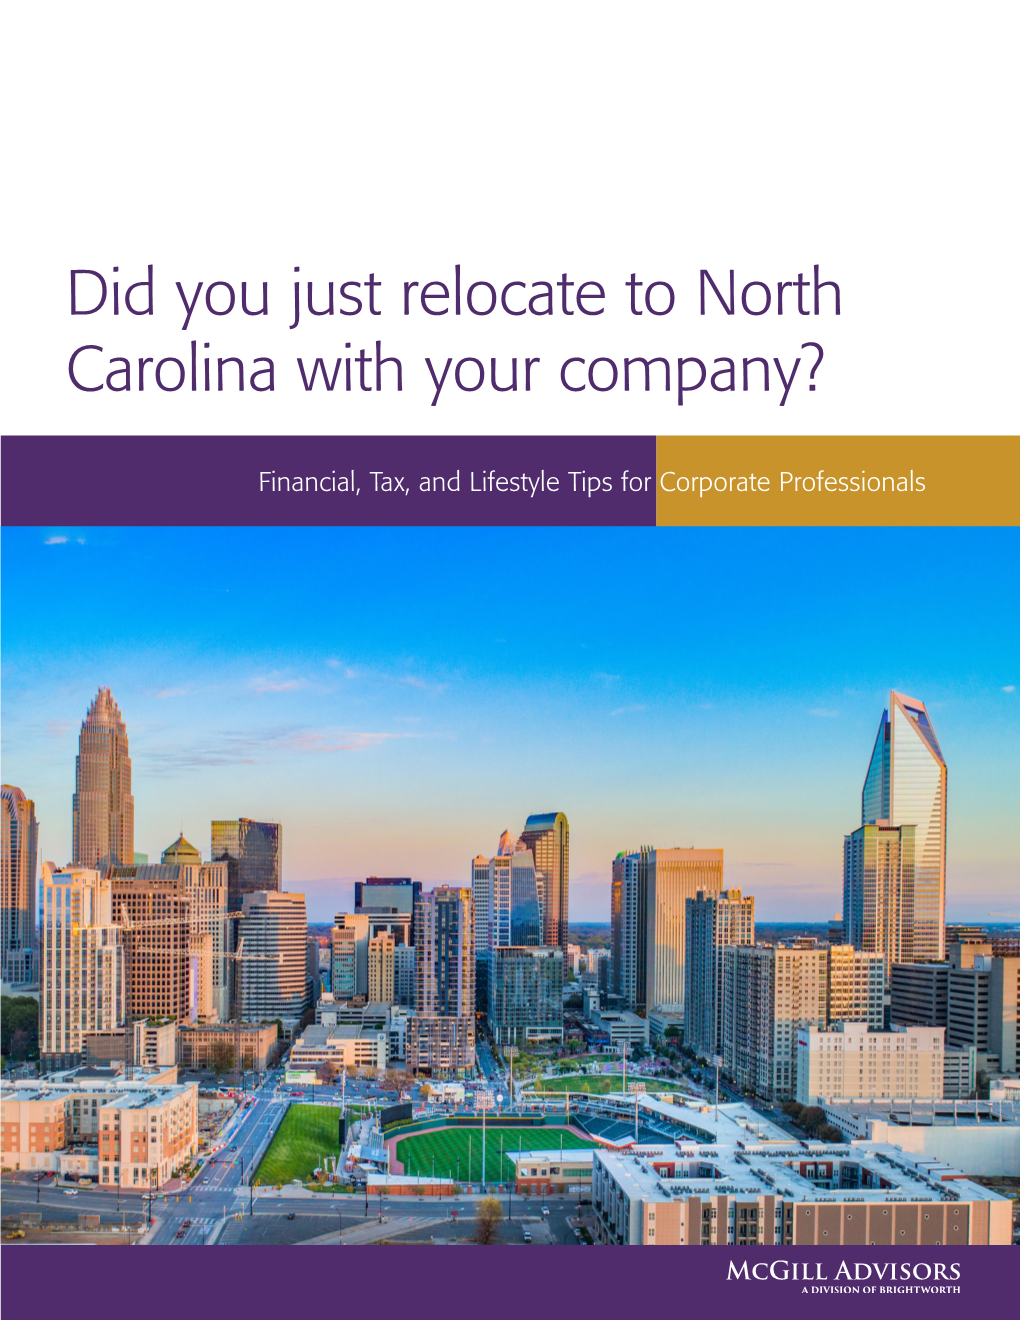 Did You Just Relocate to North Carolina with Your Company?